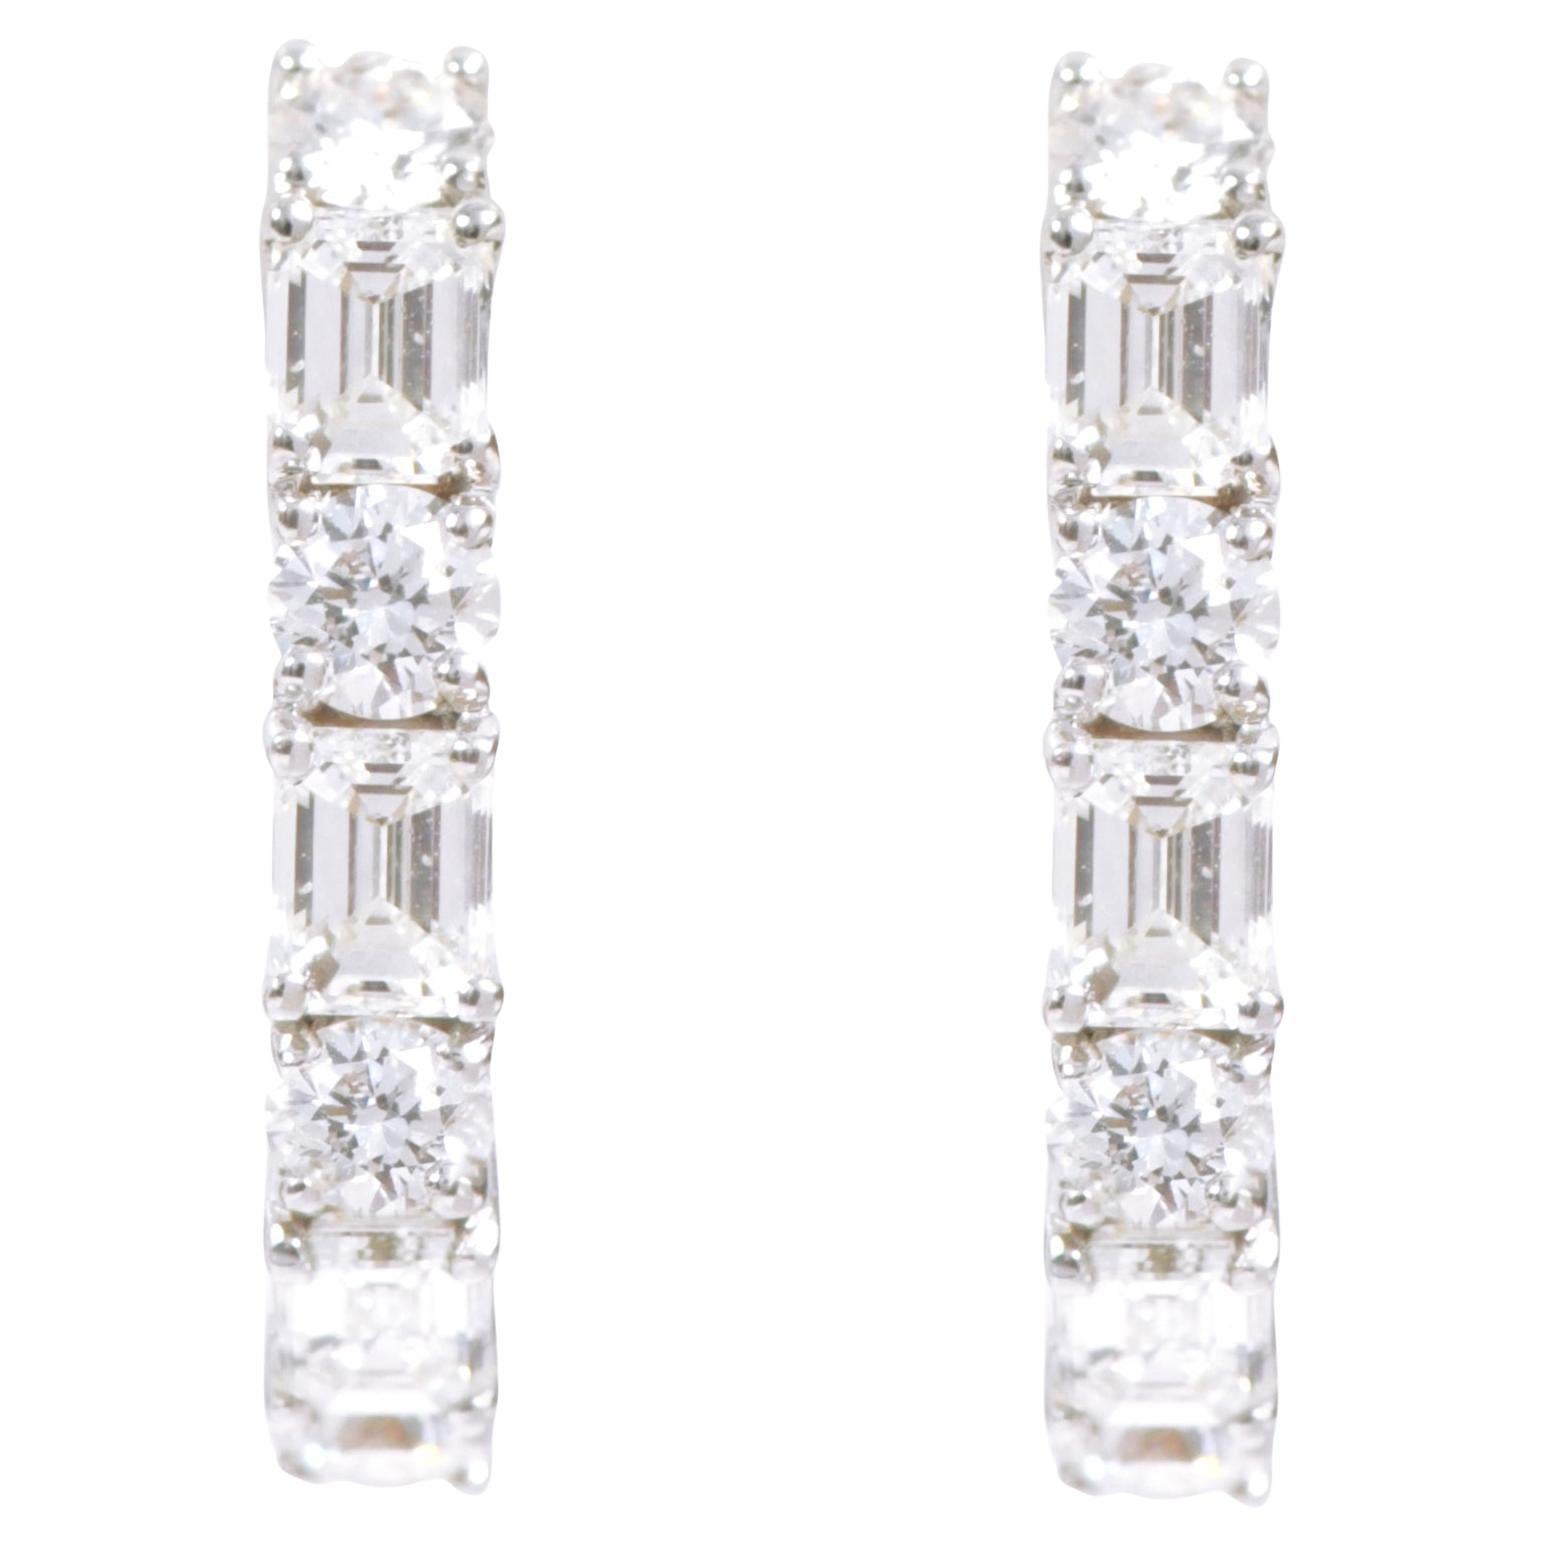 18 Karat White Gold 2.05 Carat Diamond Solitaire Hoops

This magnificent solitaire diamond half open hoop is terrific. The solitaire emerald cut and round diamond alternating one after the other form the half-open hoop that shows the diamond